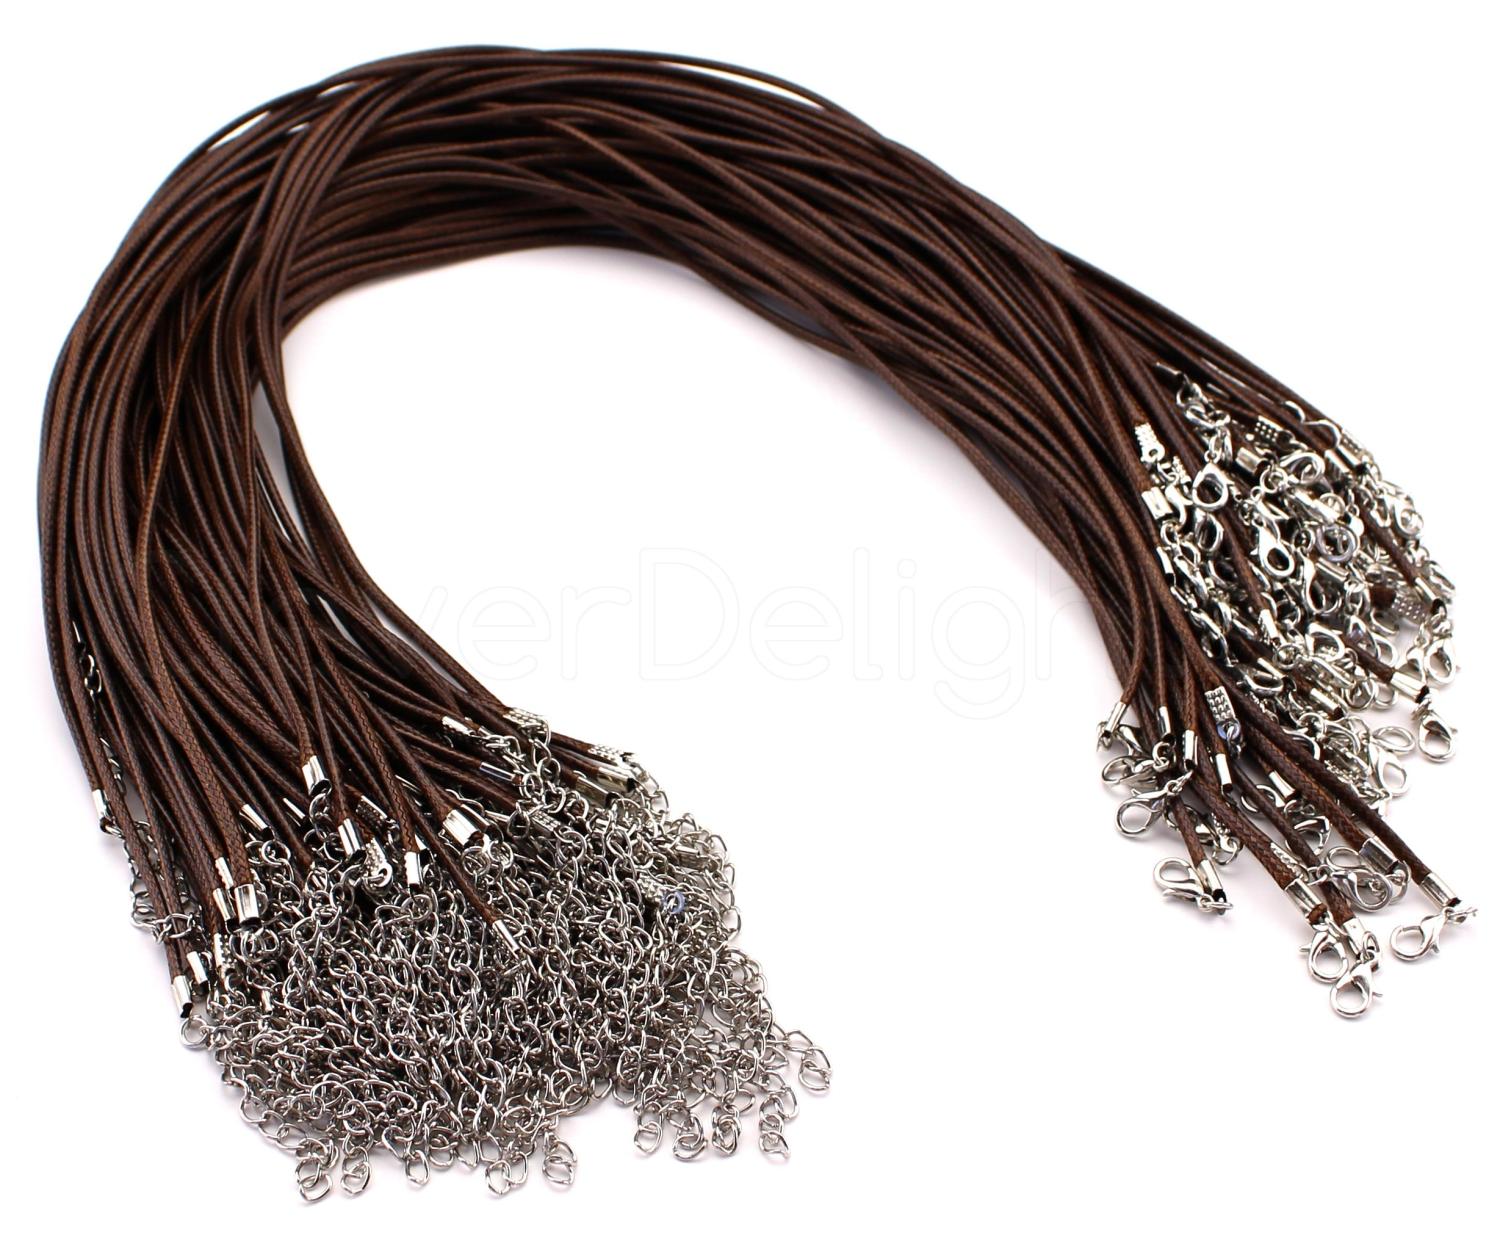 CleverDelights Imitation Leather Cord Necklaces - Brown - 18 Inch